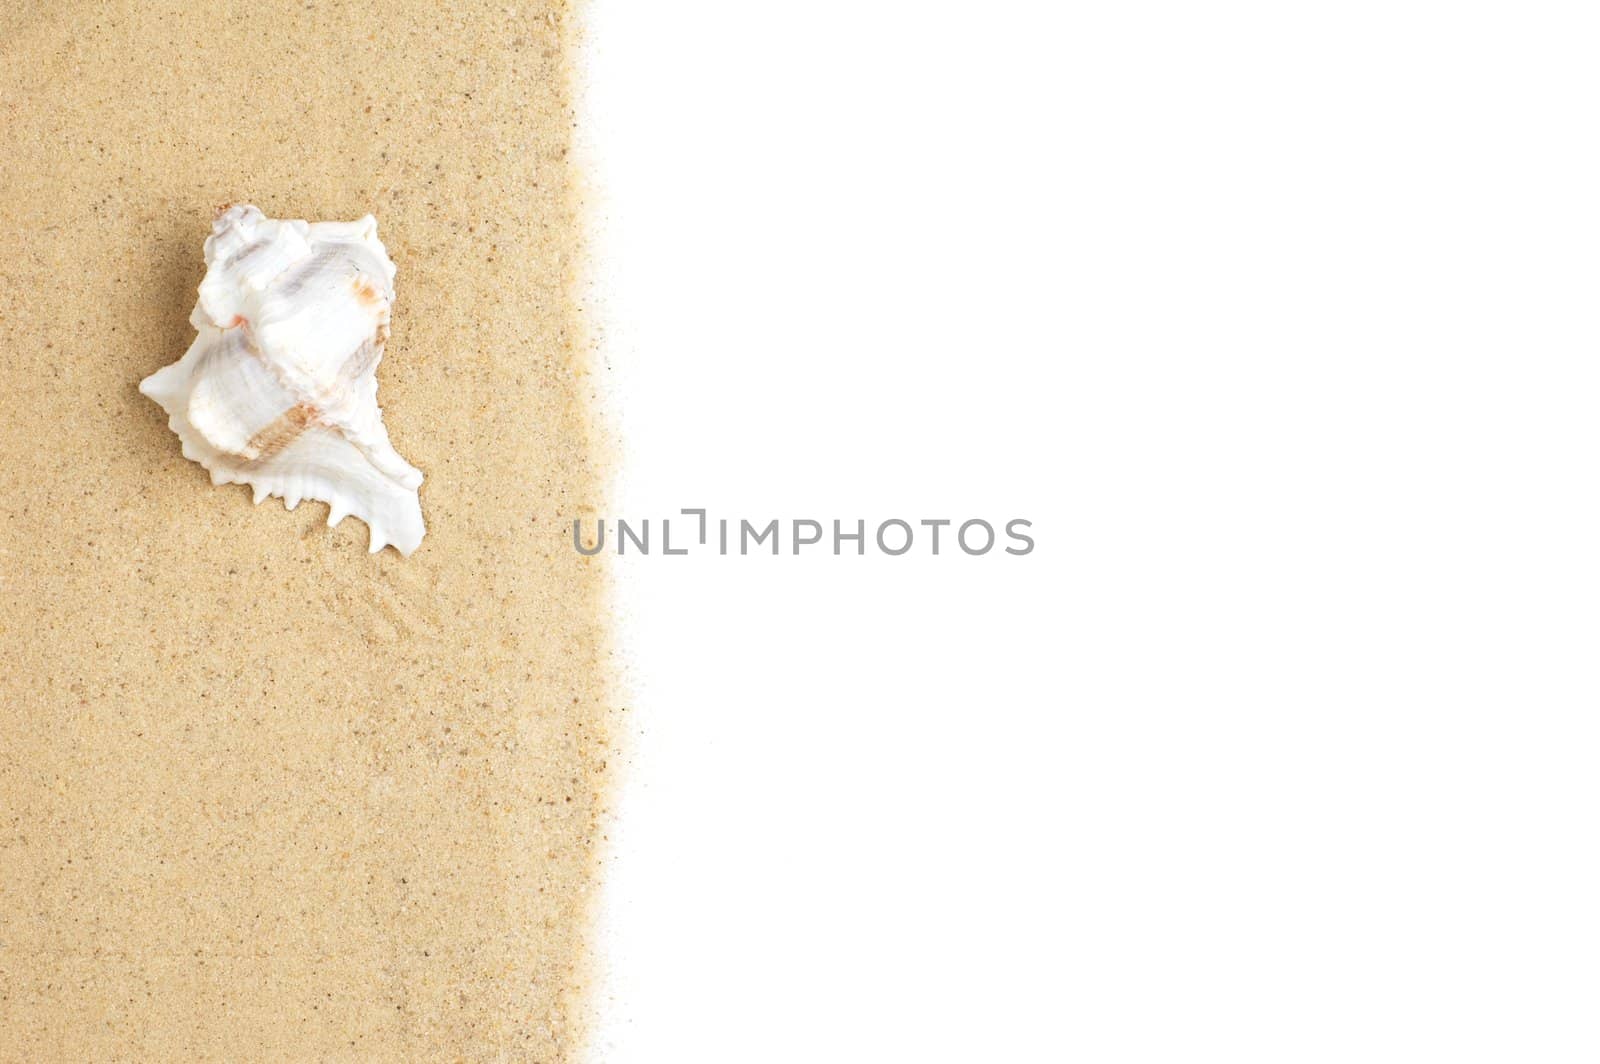 Beach scene photographed against a white background.